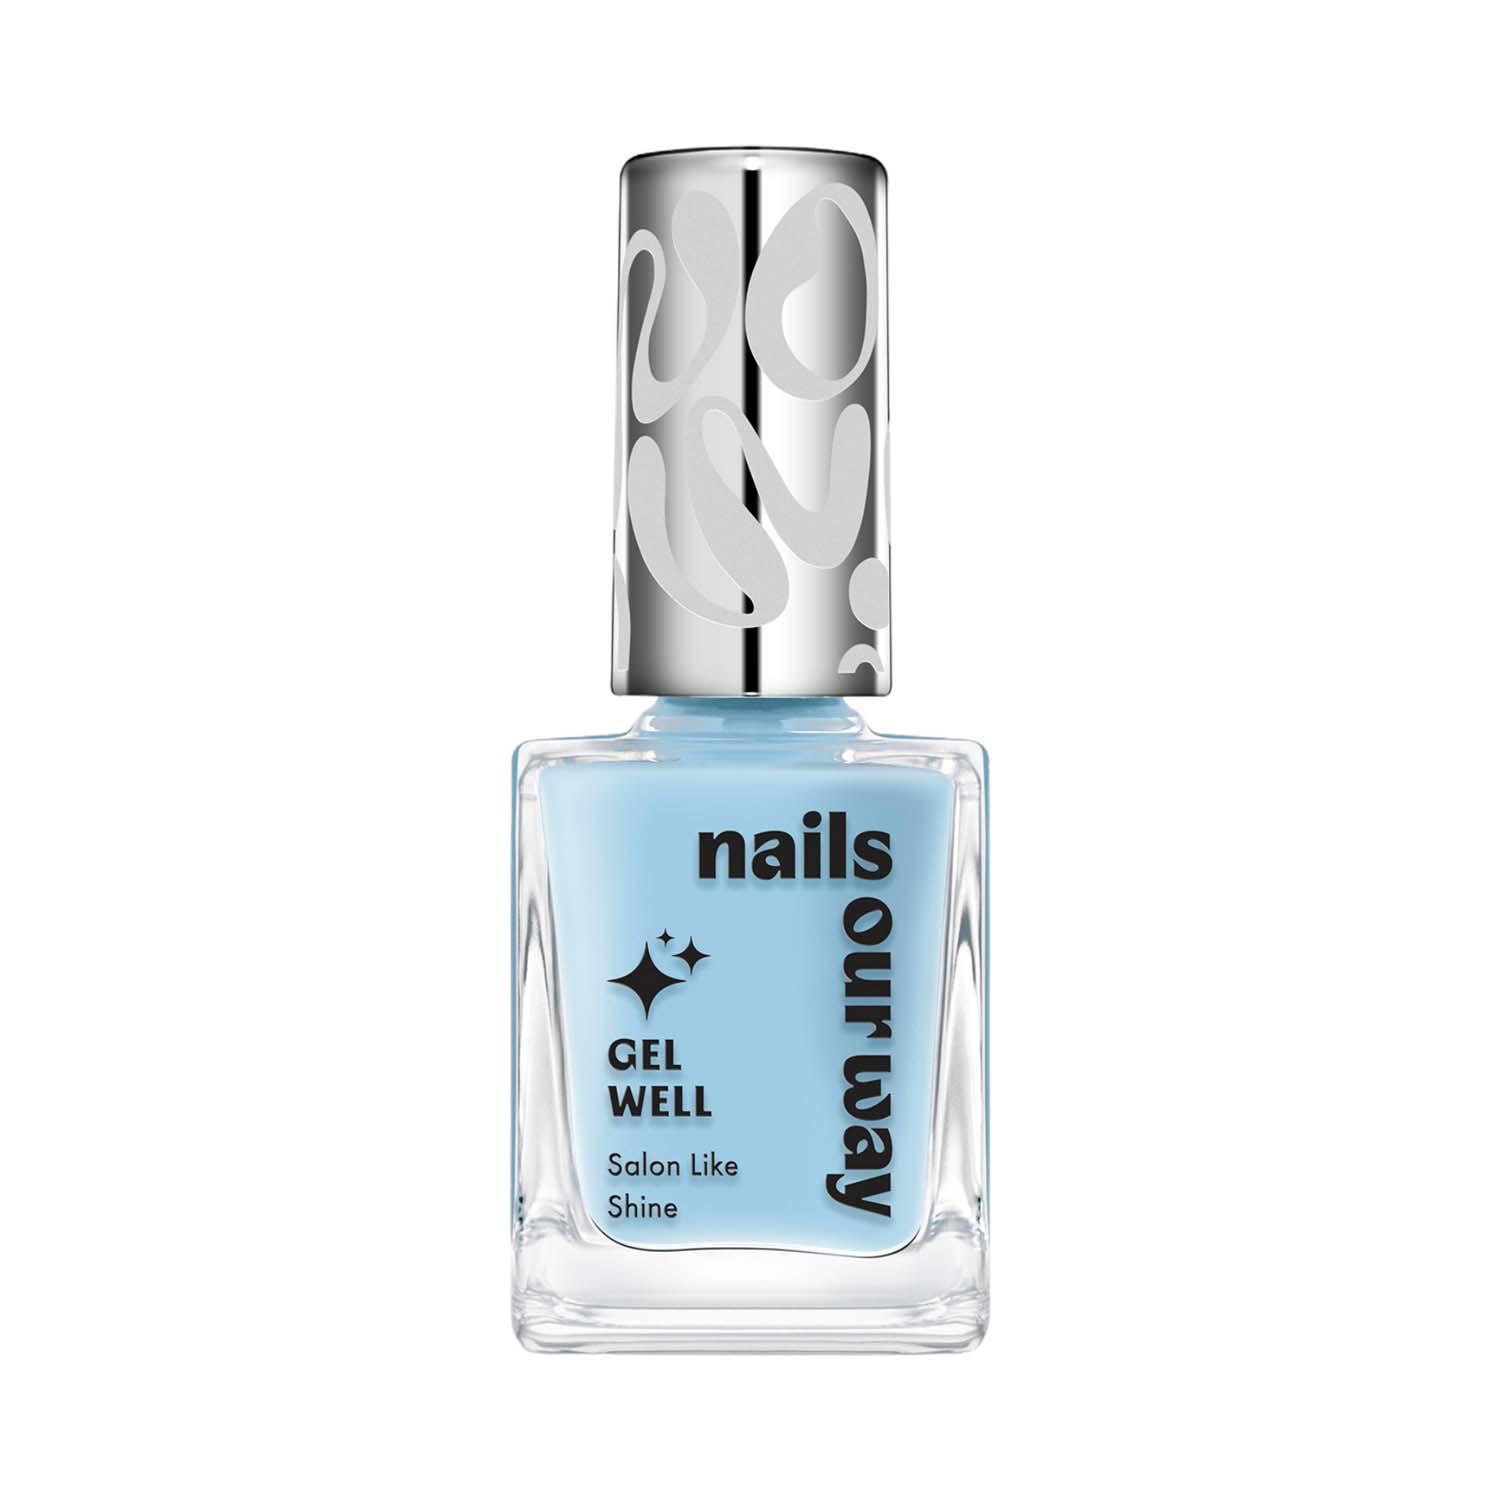 Nails Our Way | Nails Our Way Gel Well Nail Enamel - 401 Swelte (10 ml)